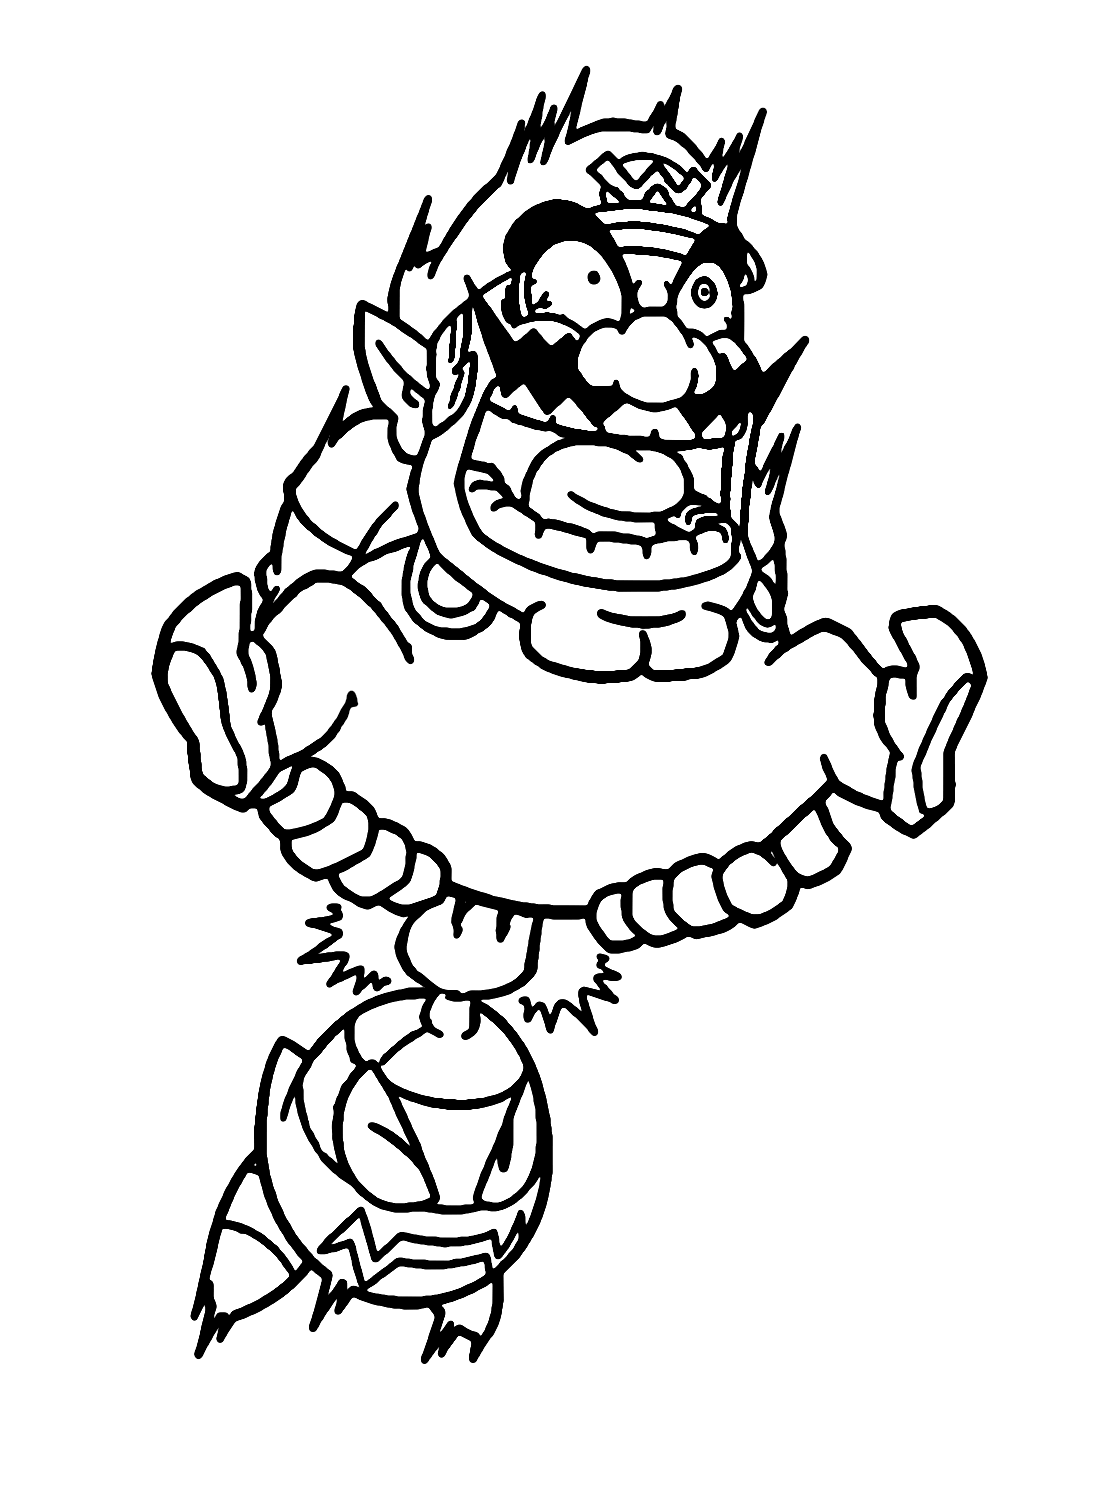 Funny Wario for Kids Coloring Page